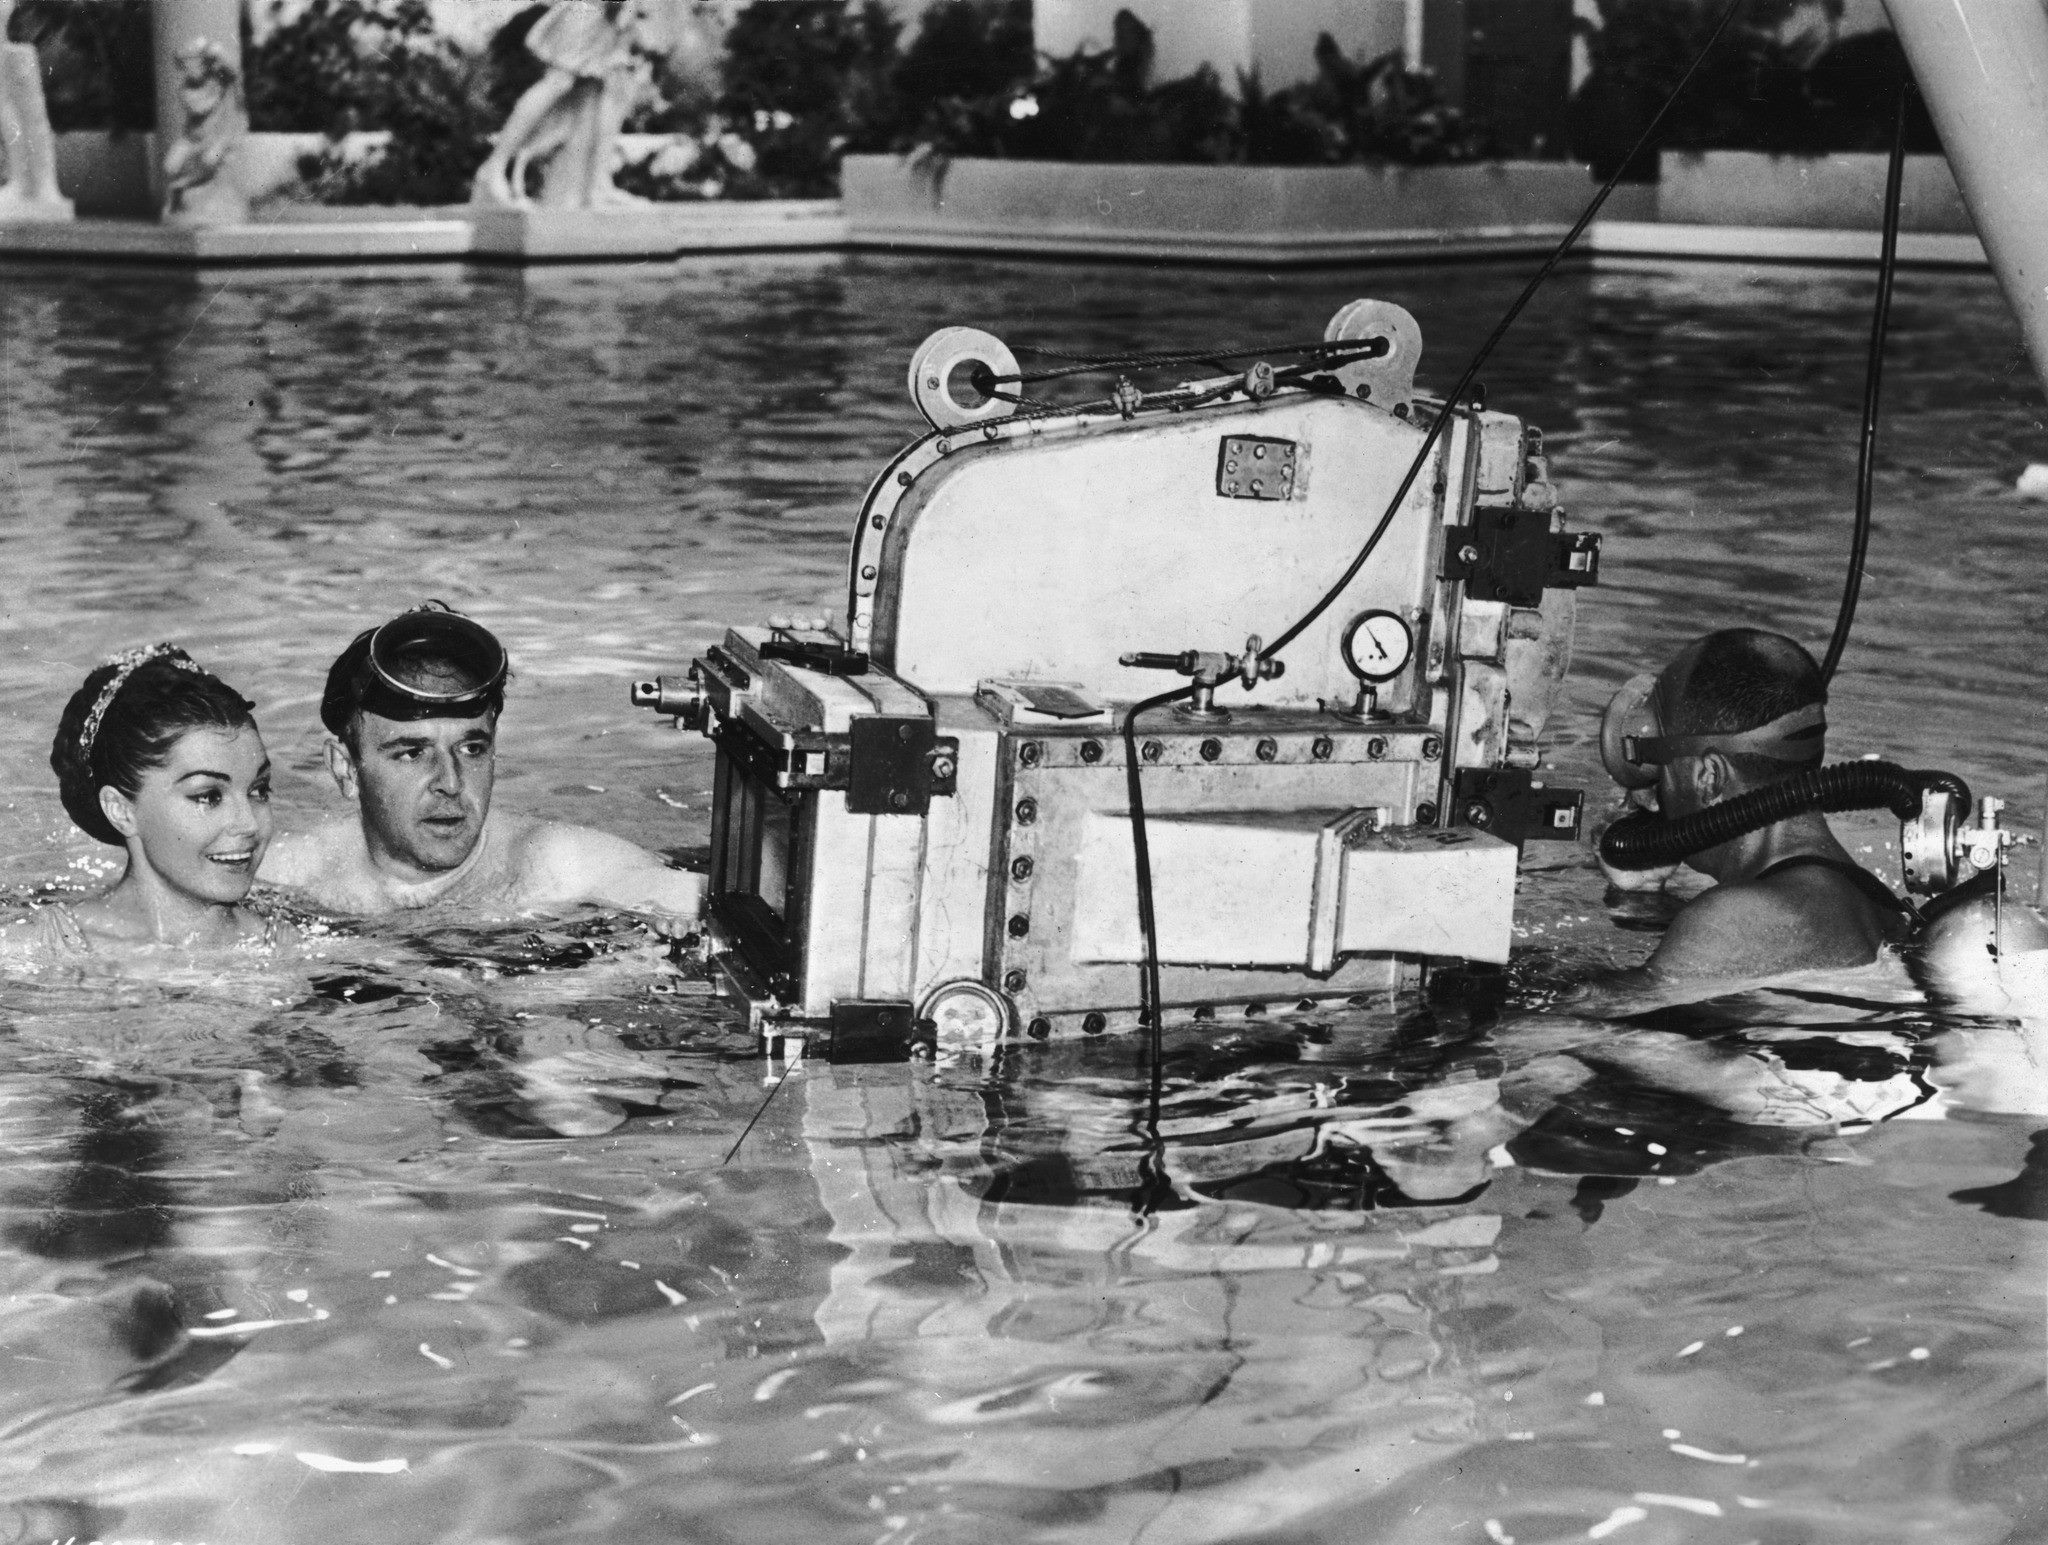 1955: George Sidney, left, while directing swimmer and actress Esther Williams on the set of his film "Jupiter's Darling." The cameraman is wearing scuba gear. [Photo: Hulton Archive]